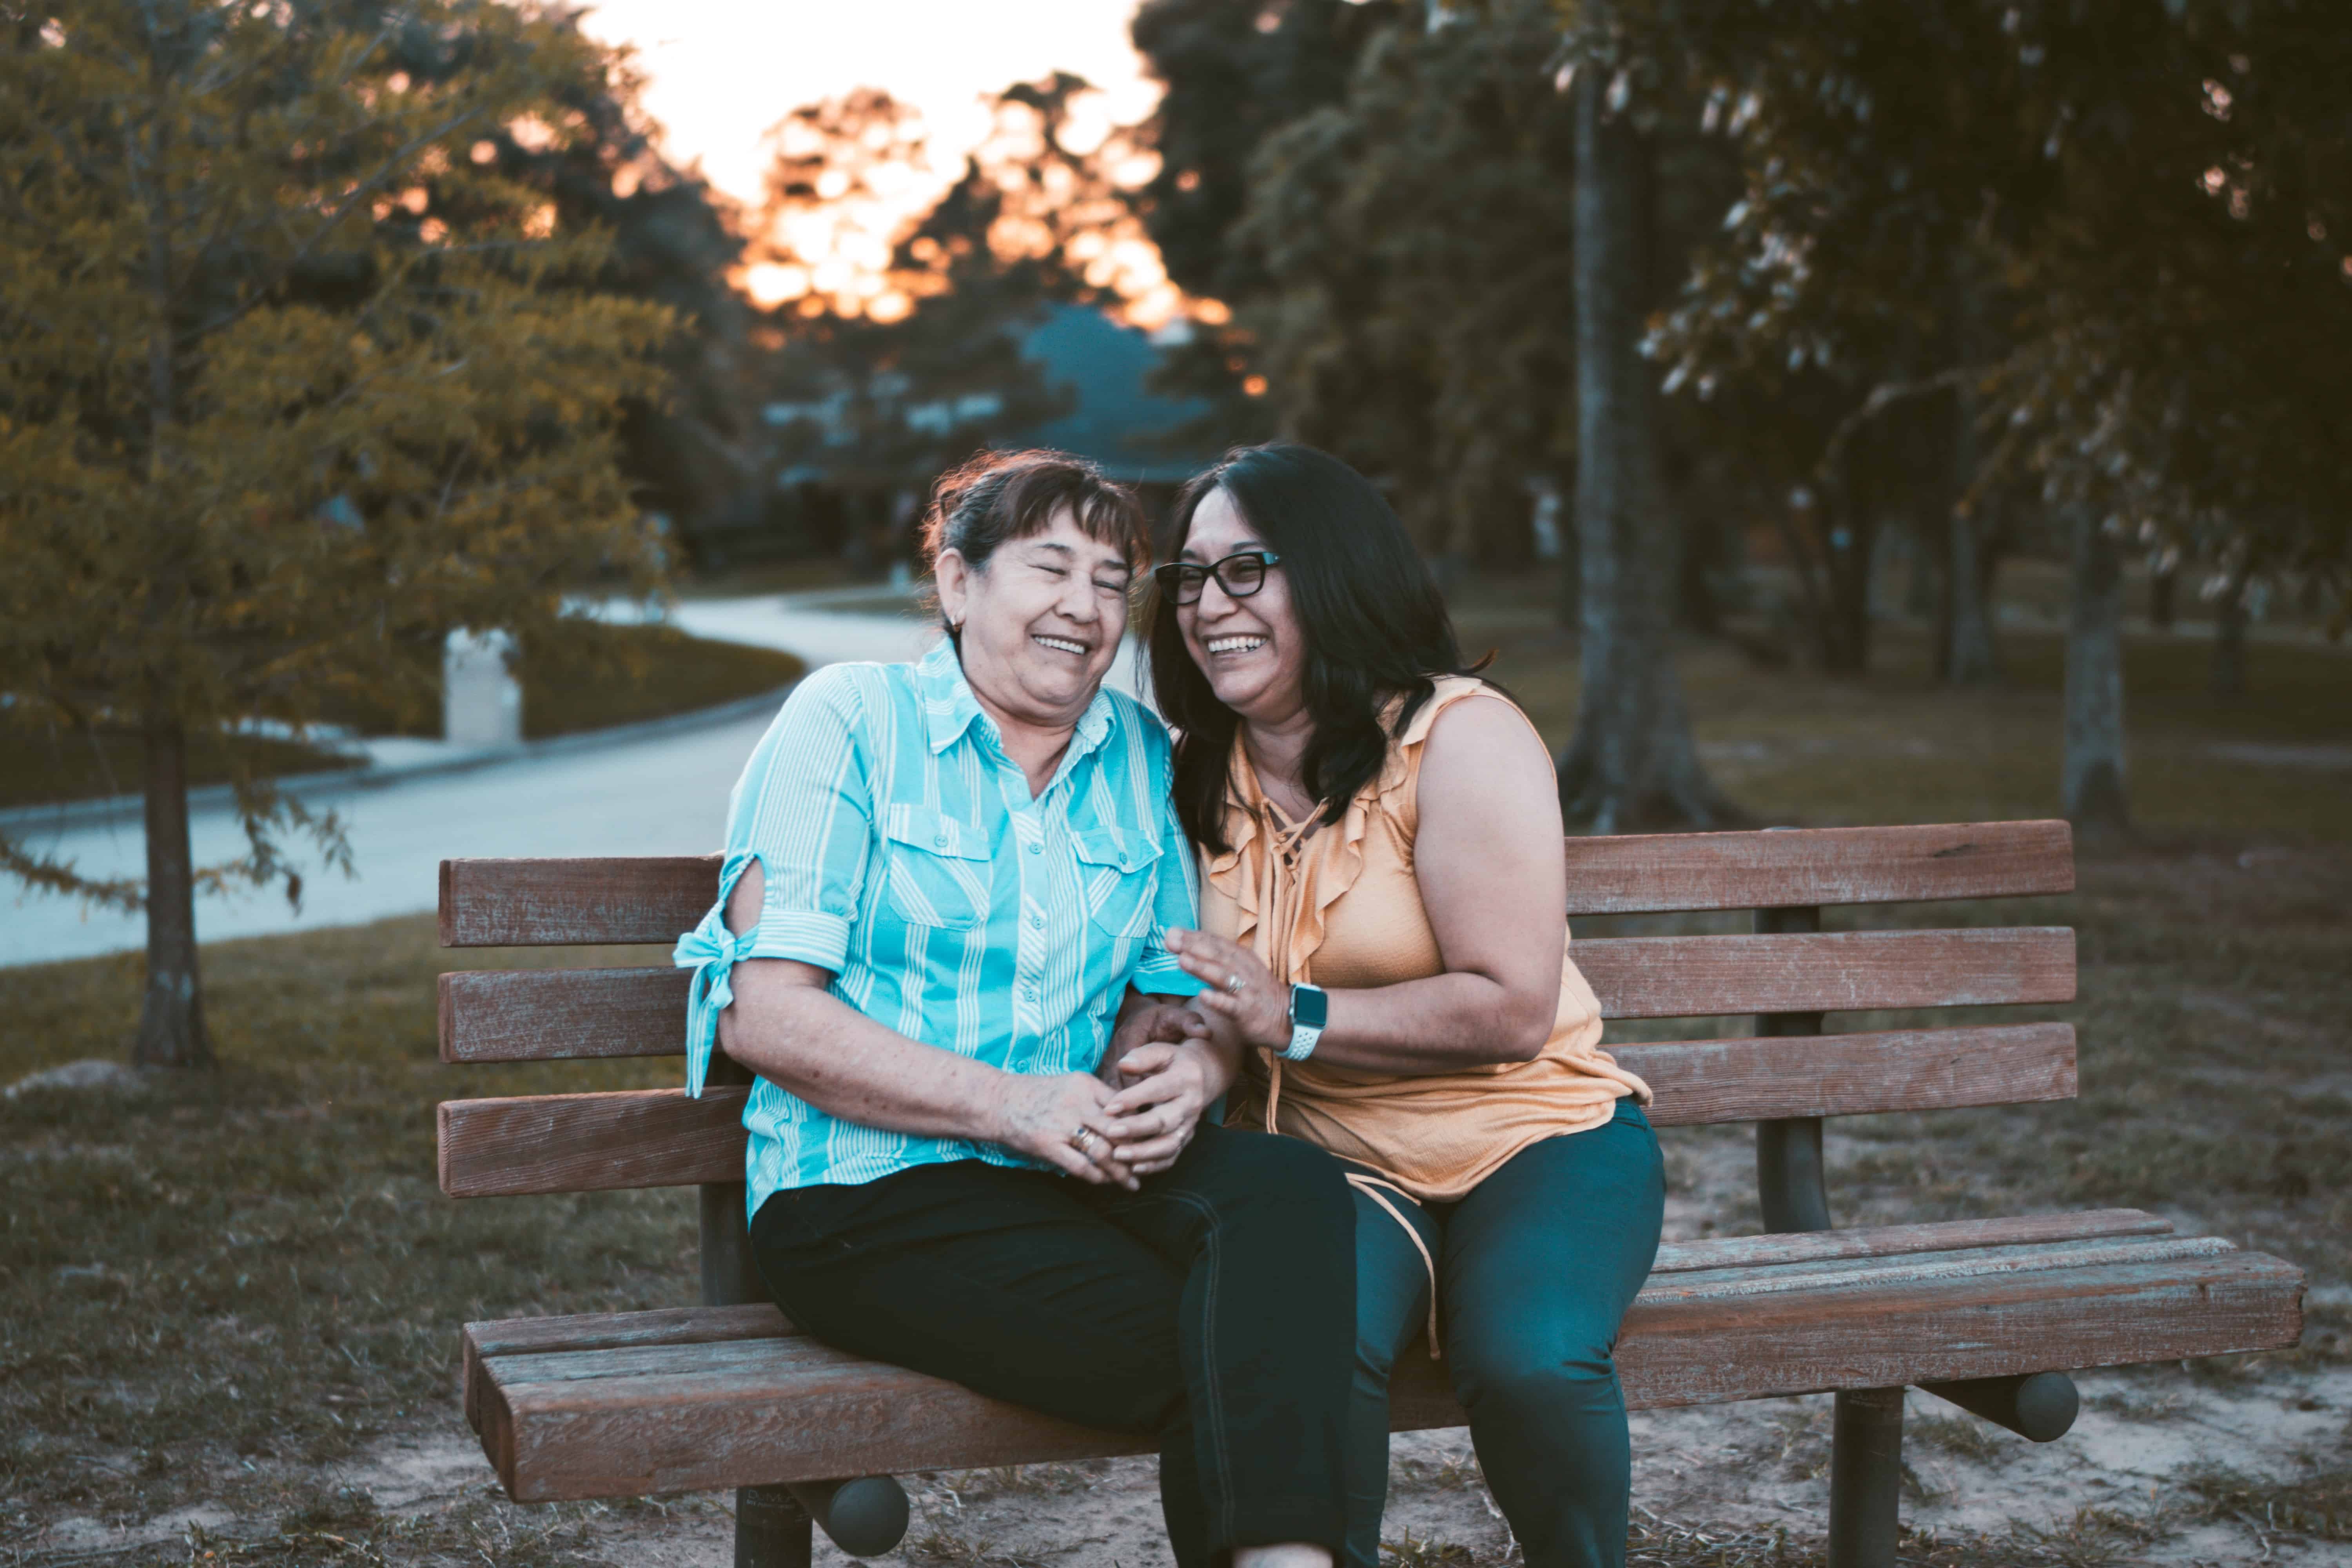 Two Latina women, one older and one middle aged, sitting and laughing on a park bench as the sun sets.